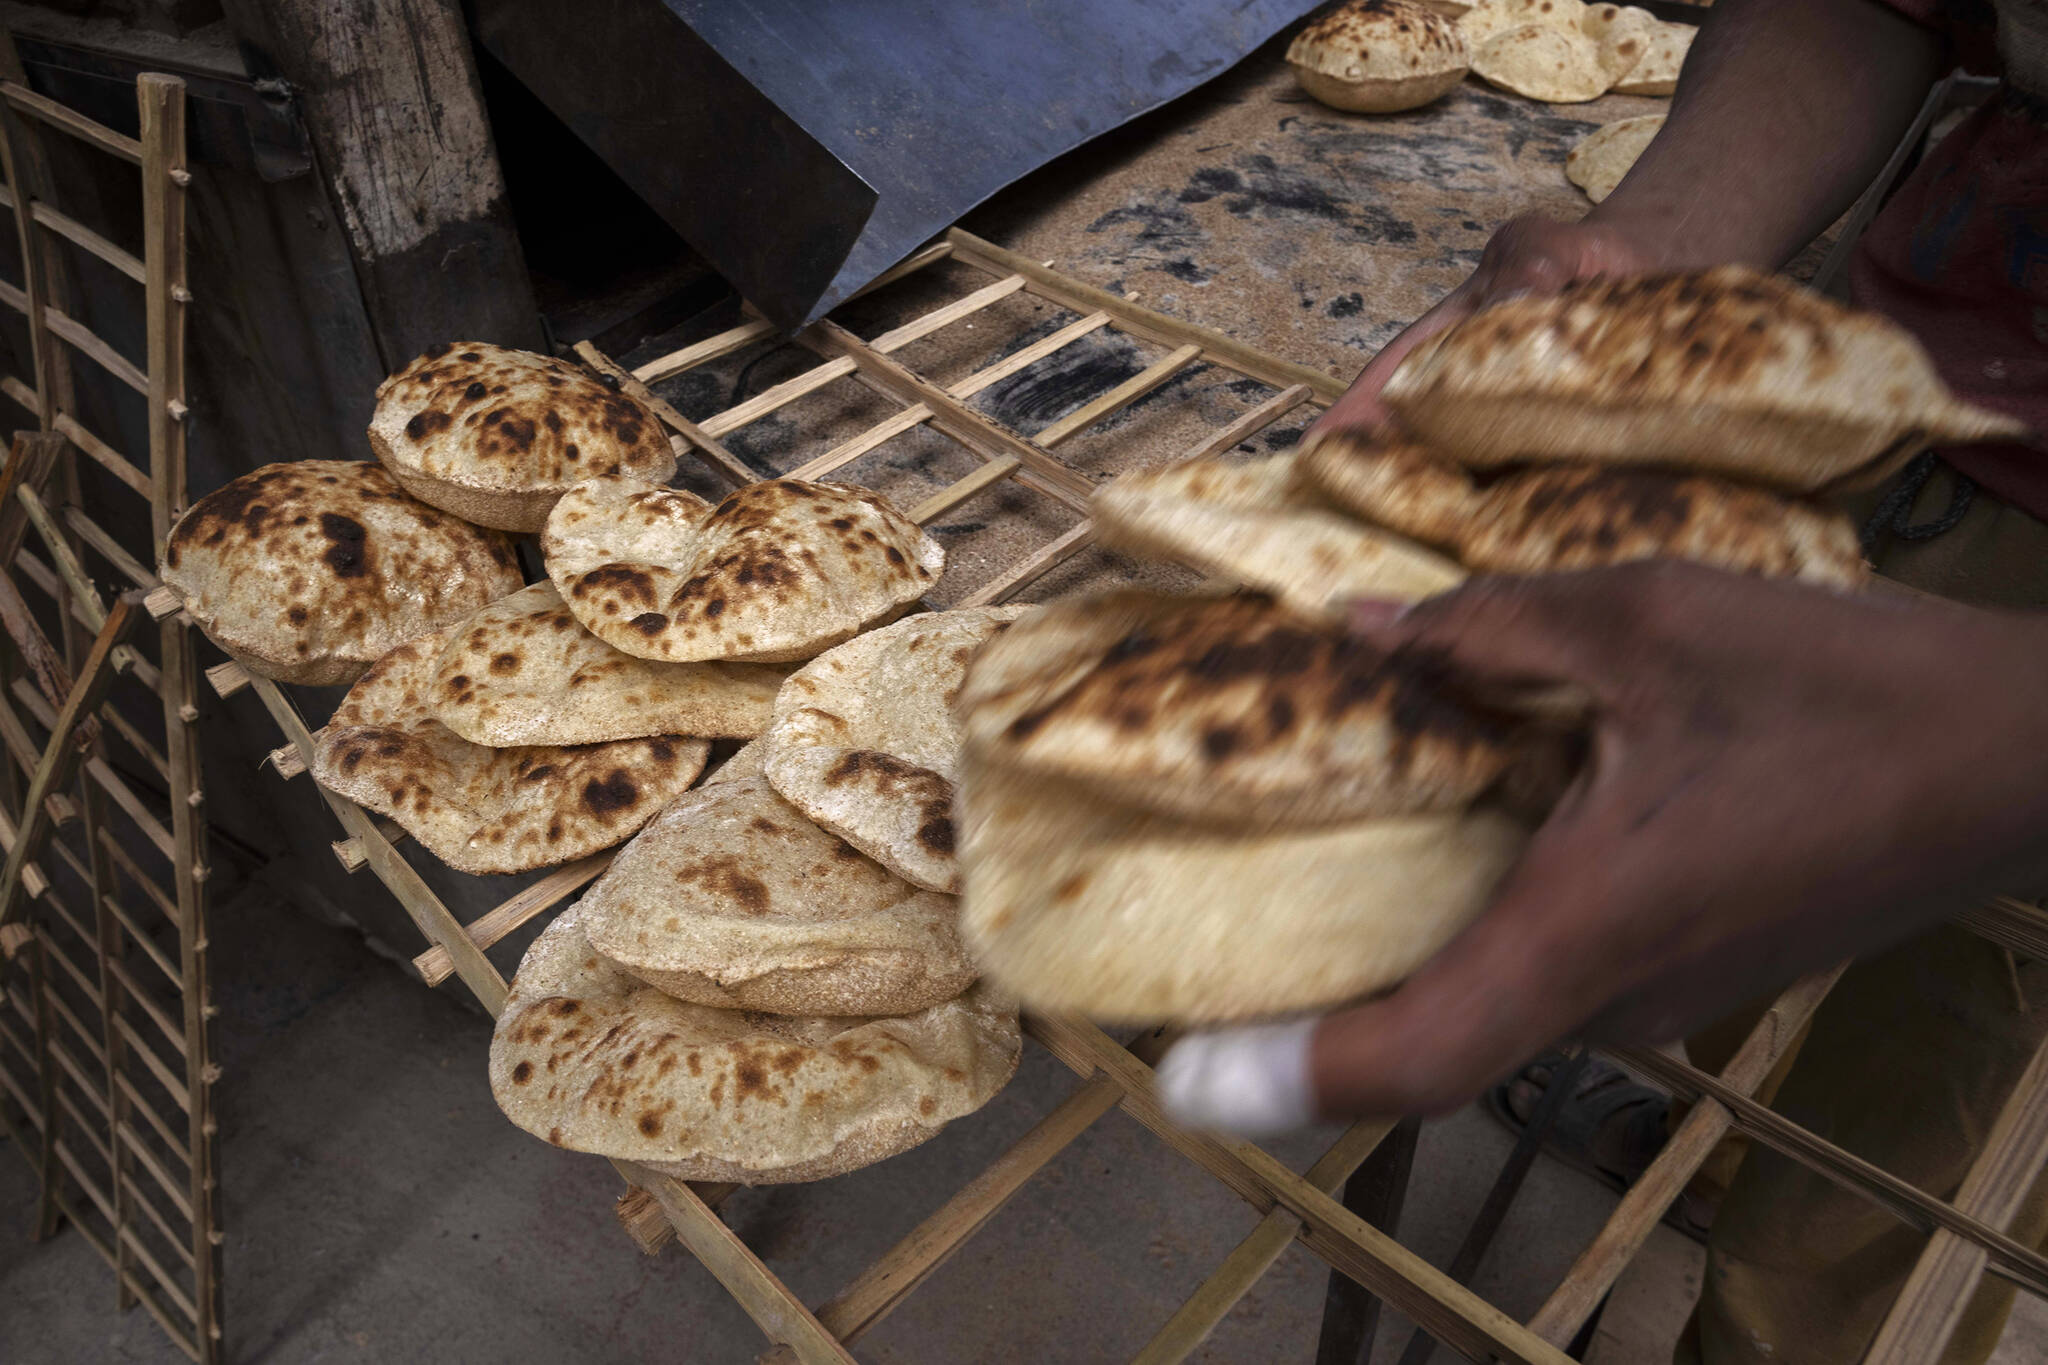 FILE - A worker collects Egyptian traditional ‘baladi’ flatbread, at a bakery, in el-Sharabia, Shubra district, Cairo, Egypt, Wednesday, March 2, 2022. Ukraine’s government banned the export of wheat, oats and other food staples on Wednesday, March 9, 2022 as authorities try to make sure they can feed people while Russia’s invasion intensifies.(AP Photo/Nariman El-Mofty, File)